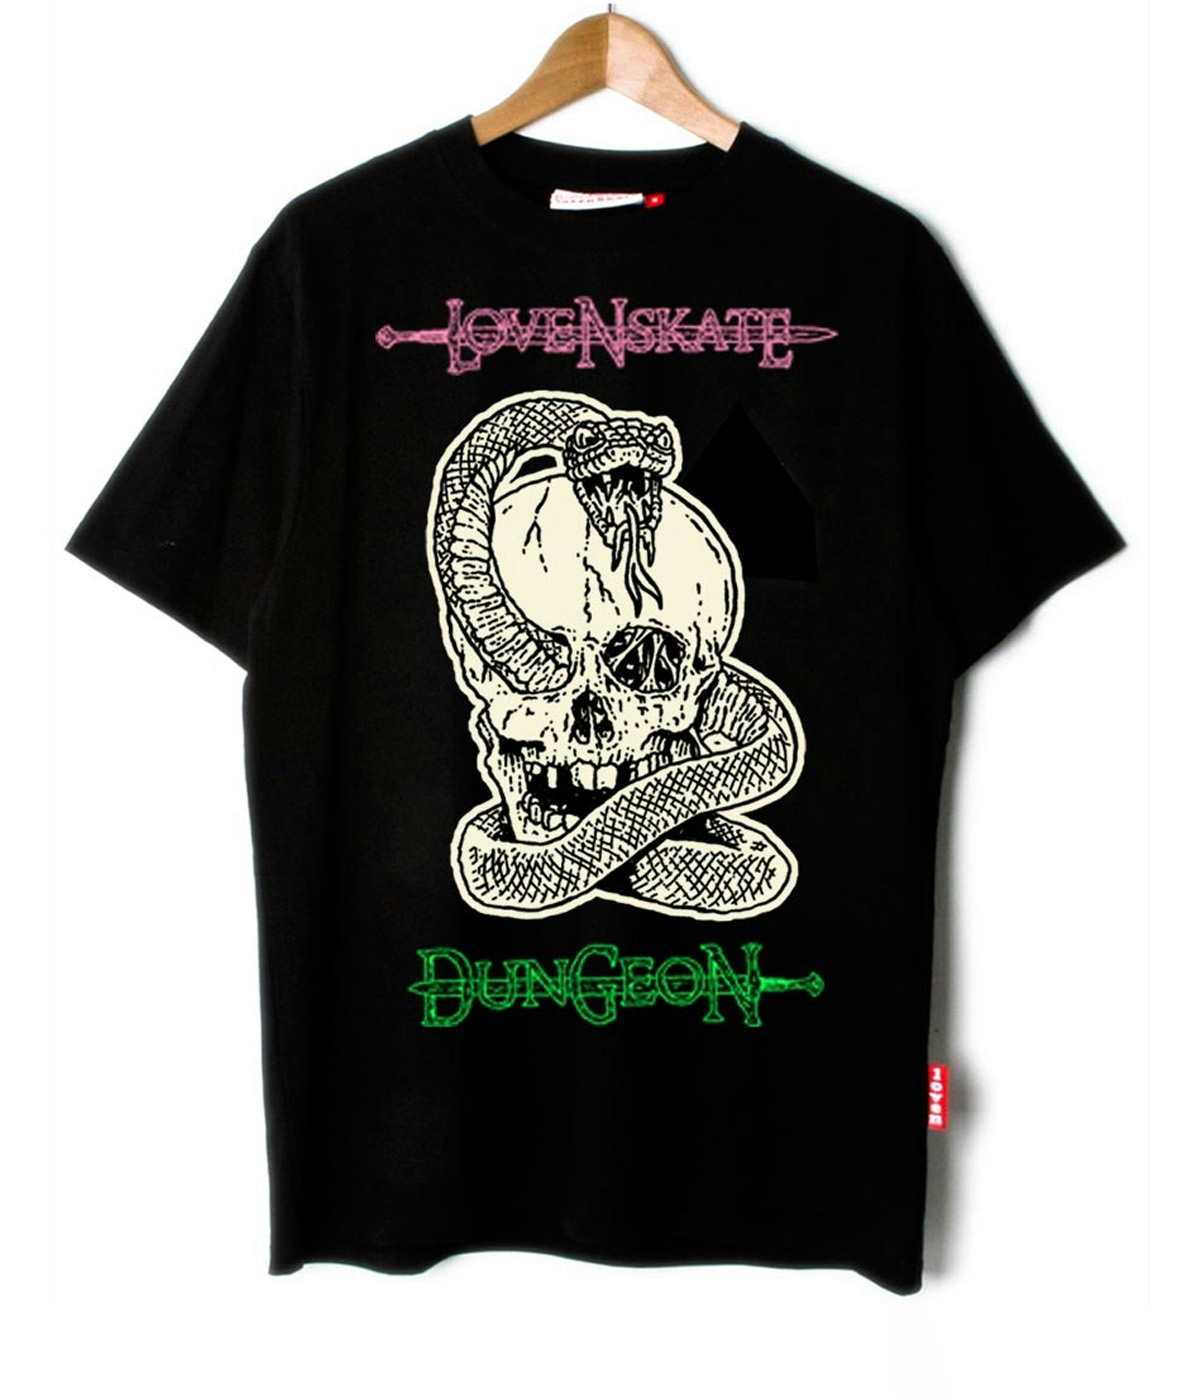 Lovenskate Dungeon X Lns' By French T-shirt Black 1